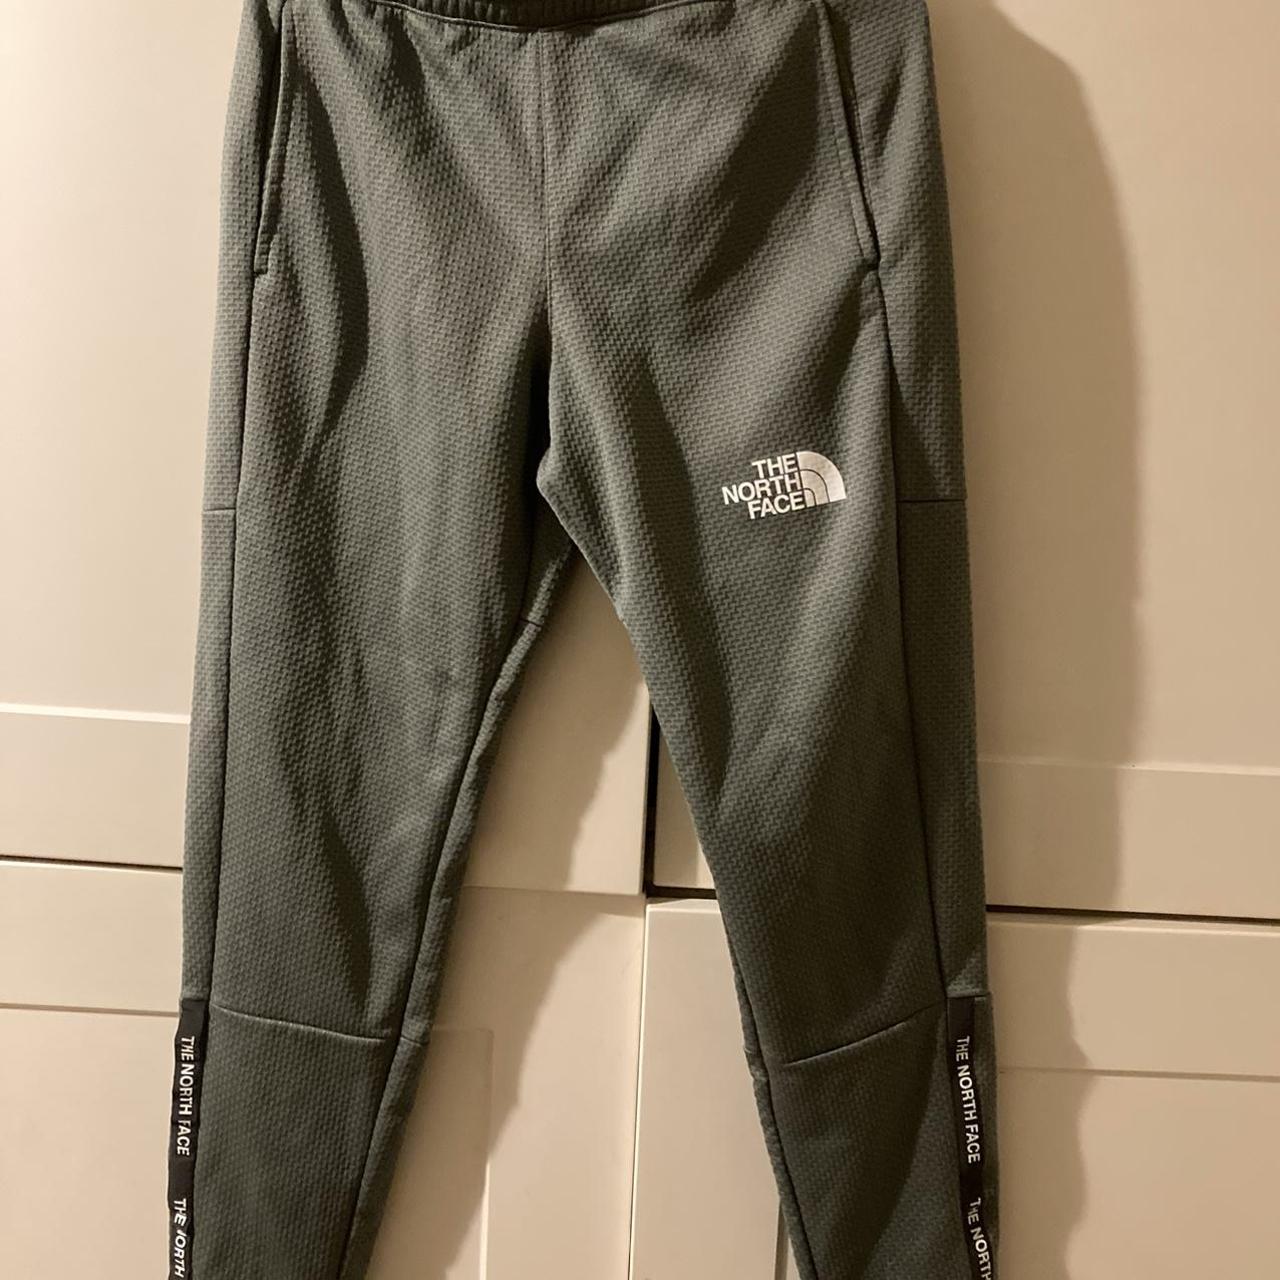 The North Face Men's Khaki and Green Joggers-tracksuits | Depop